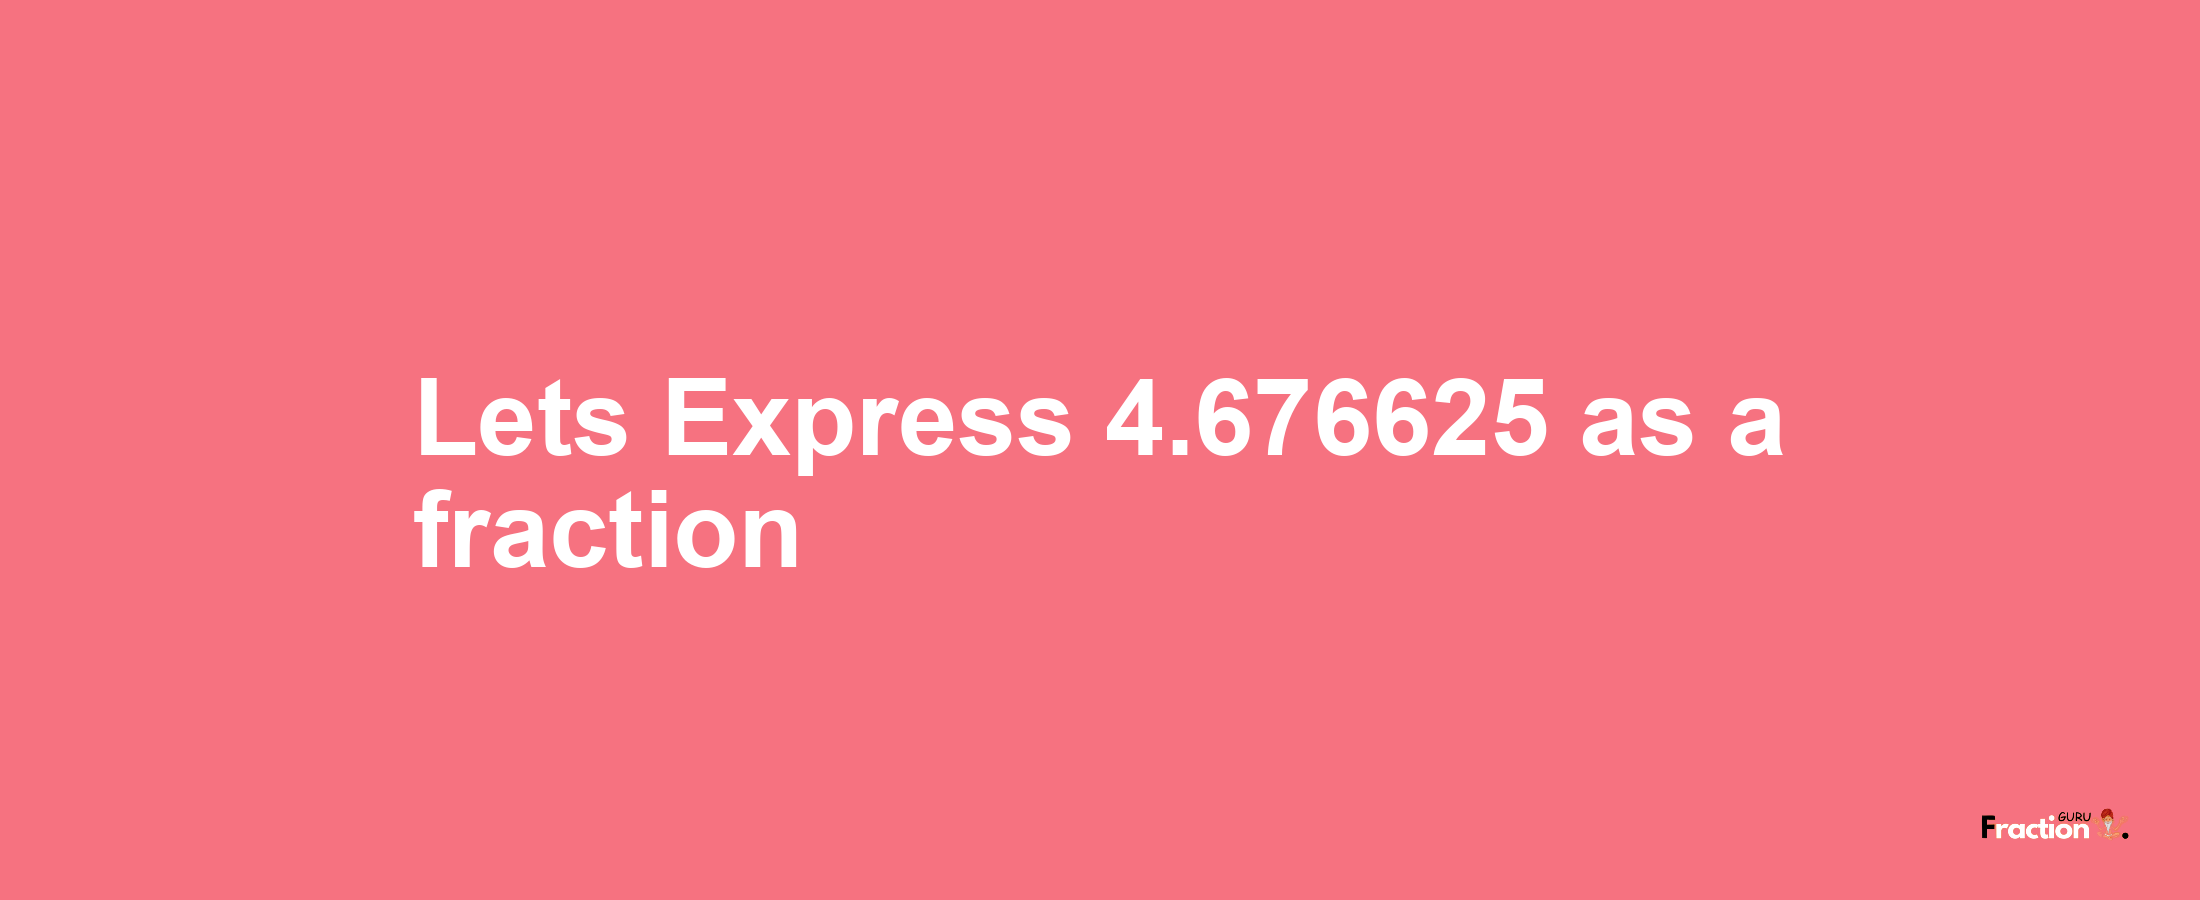 Lets Express 4.676625 as afraction